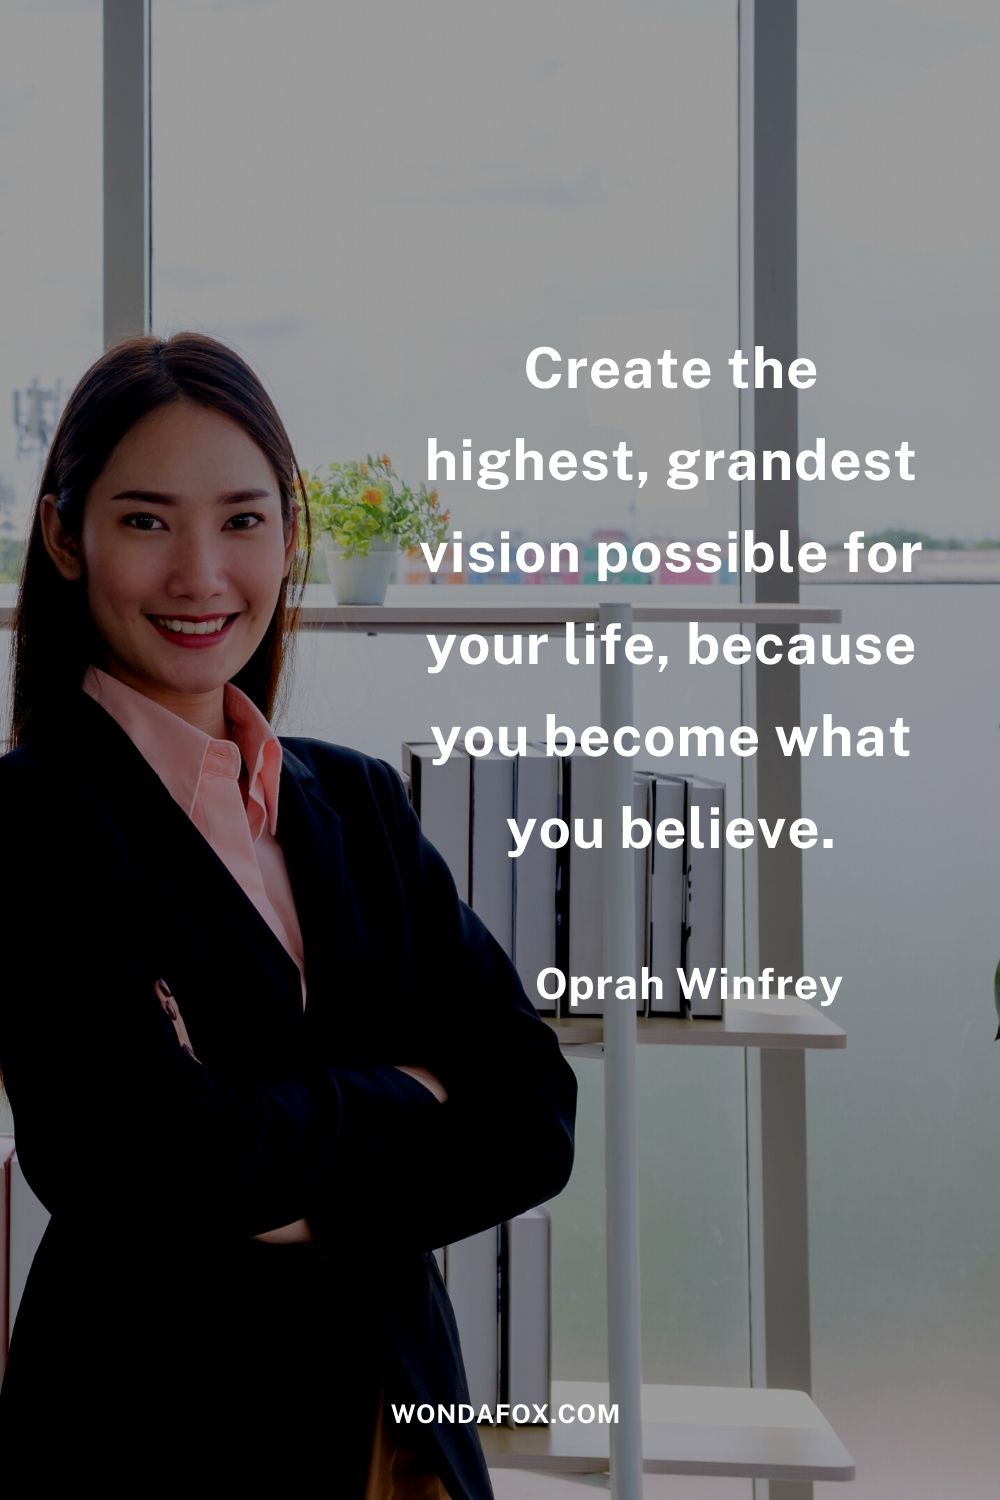 Create the highest, grandest vision possible for your life, because you become what you believe.